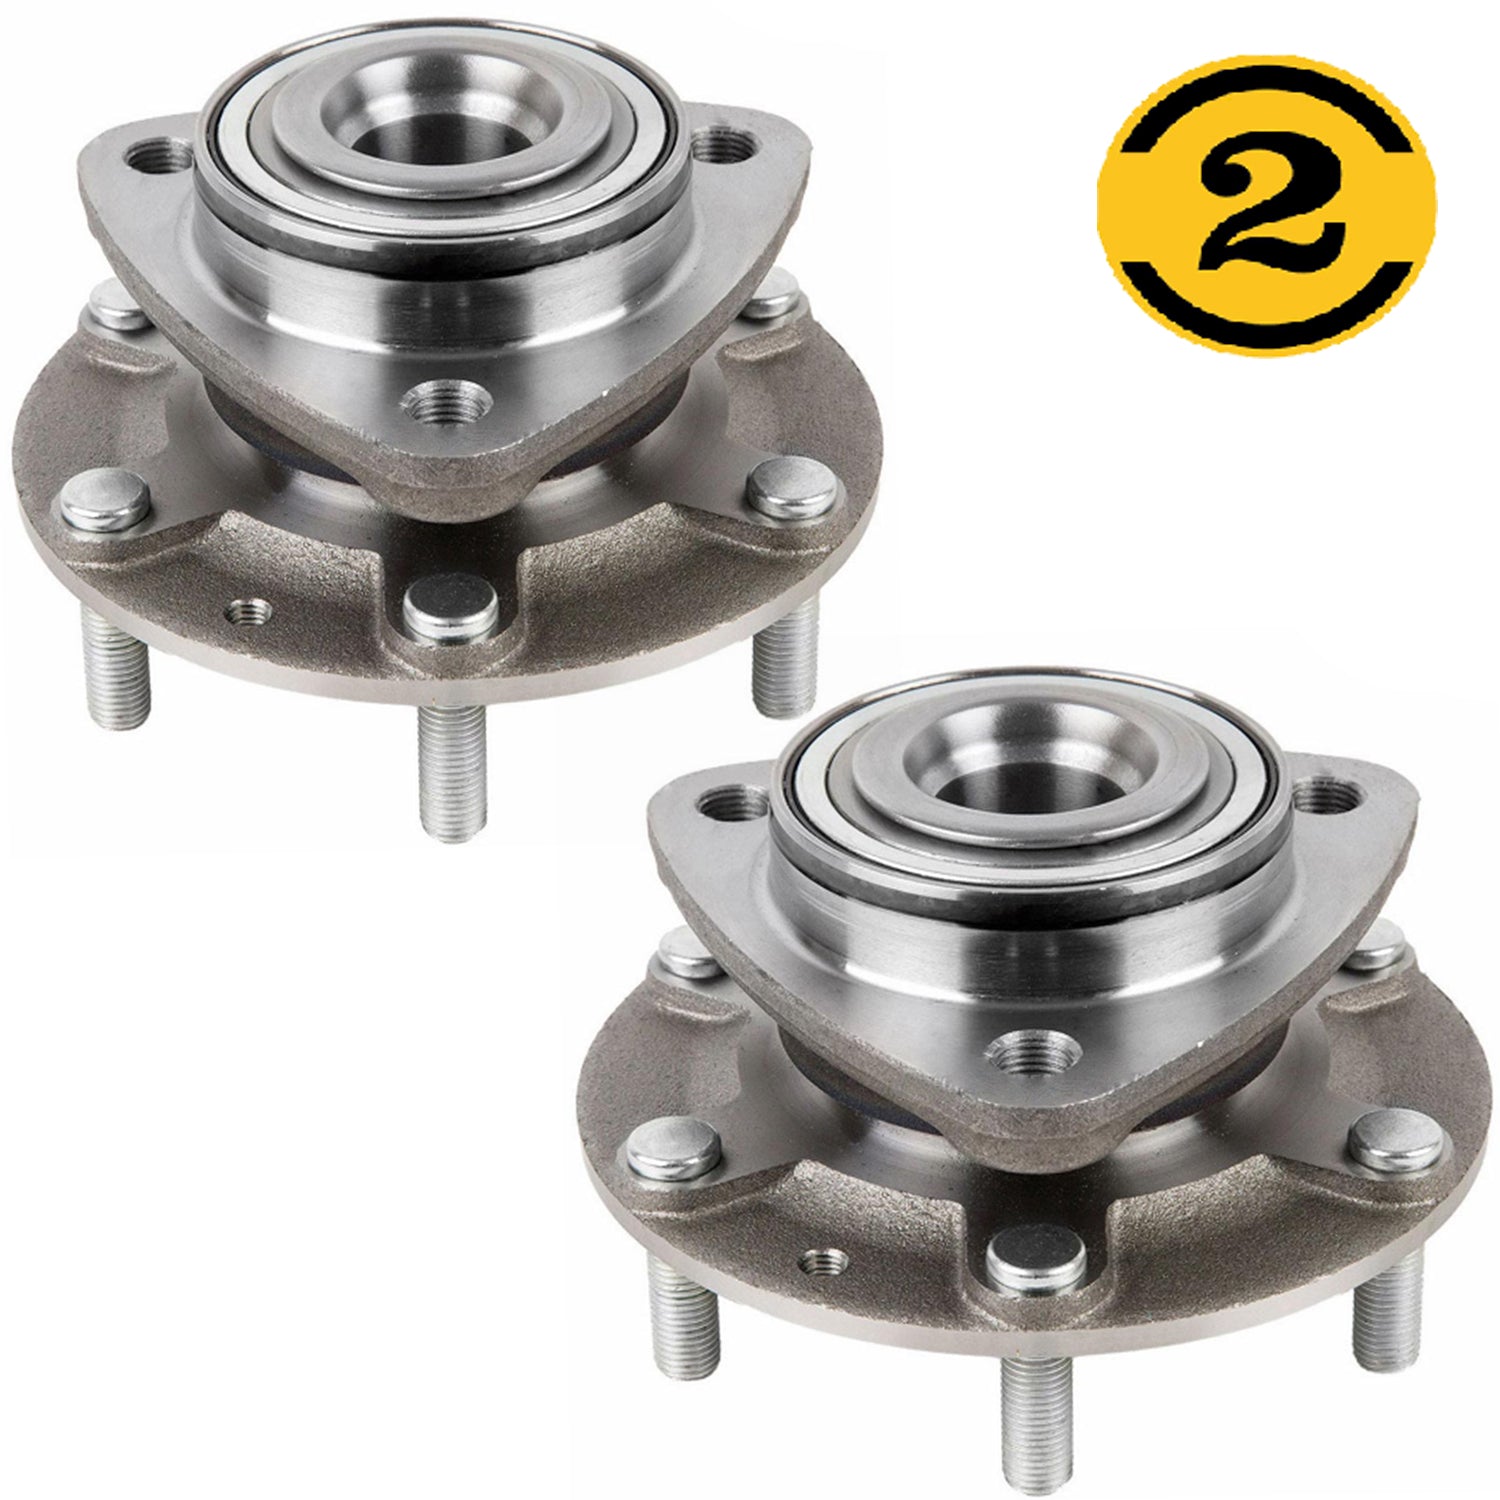 MotorbyMotor 515090 Front Wheel Bearing and Hub Assembly with 6 Lugs Fits for 2007-2009 Hyundai Entourage, 2006-2014 Kia Sedona Low-Runout OE Directly Replacement Hub Bearing MotorbyMotor